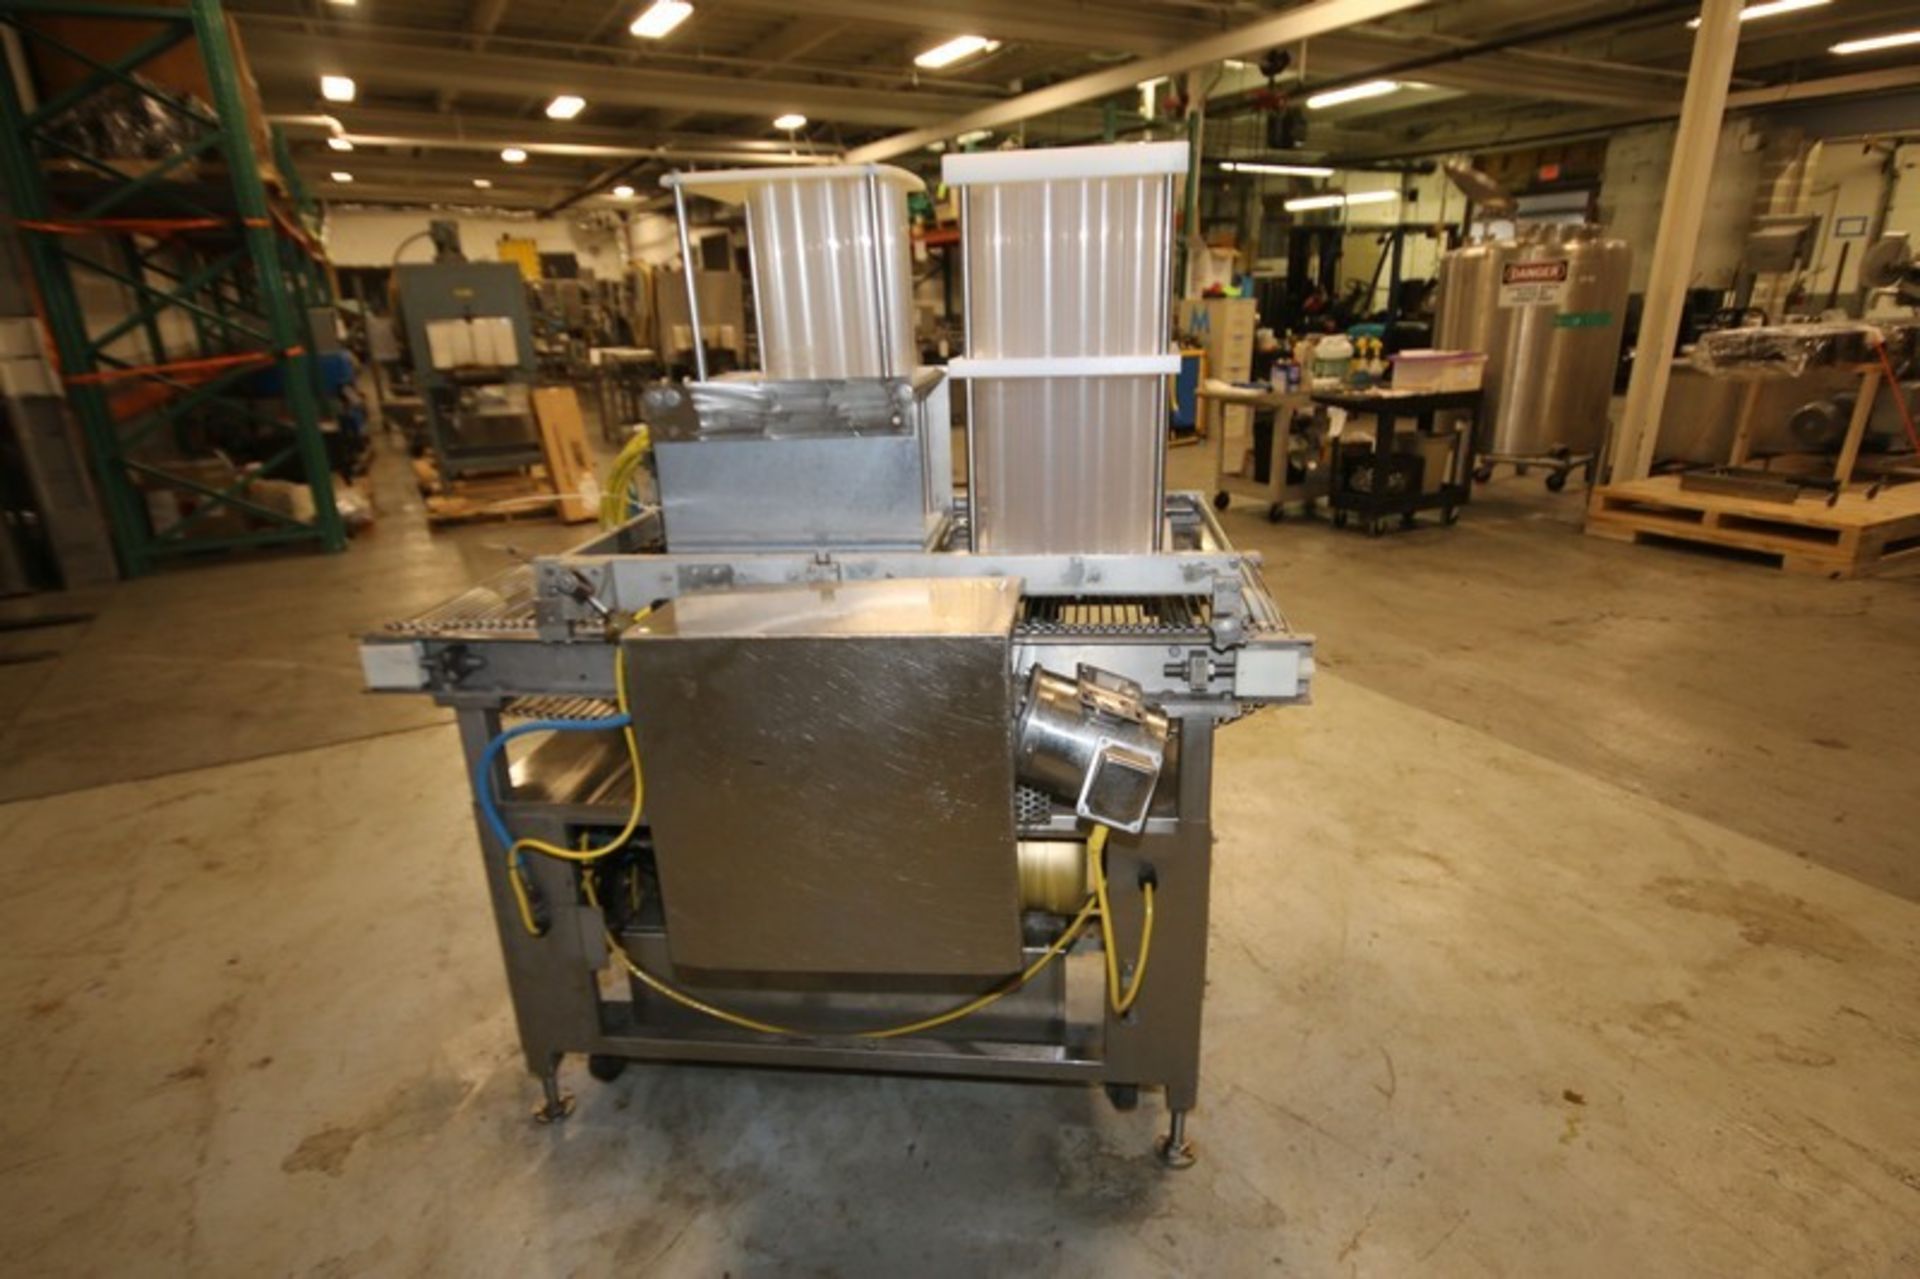 Grote Pepomatic S/S Pepperoni Slicer, Model FG101-2001 S/N 1029813, with Self Contained Hydraulic - Image 3 of 6